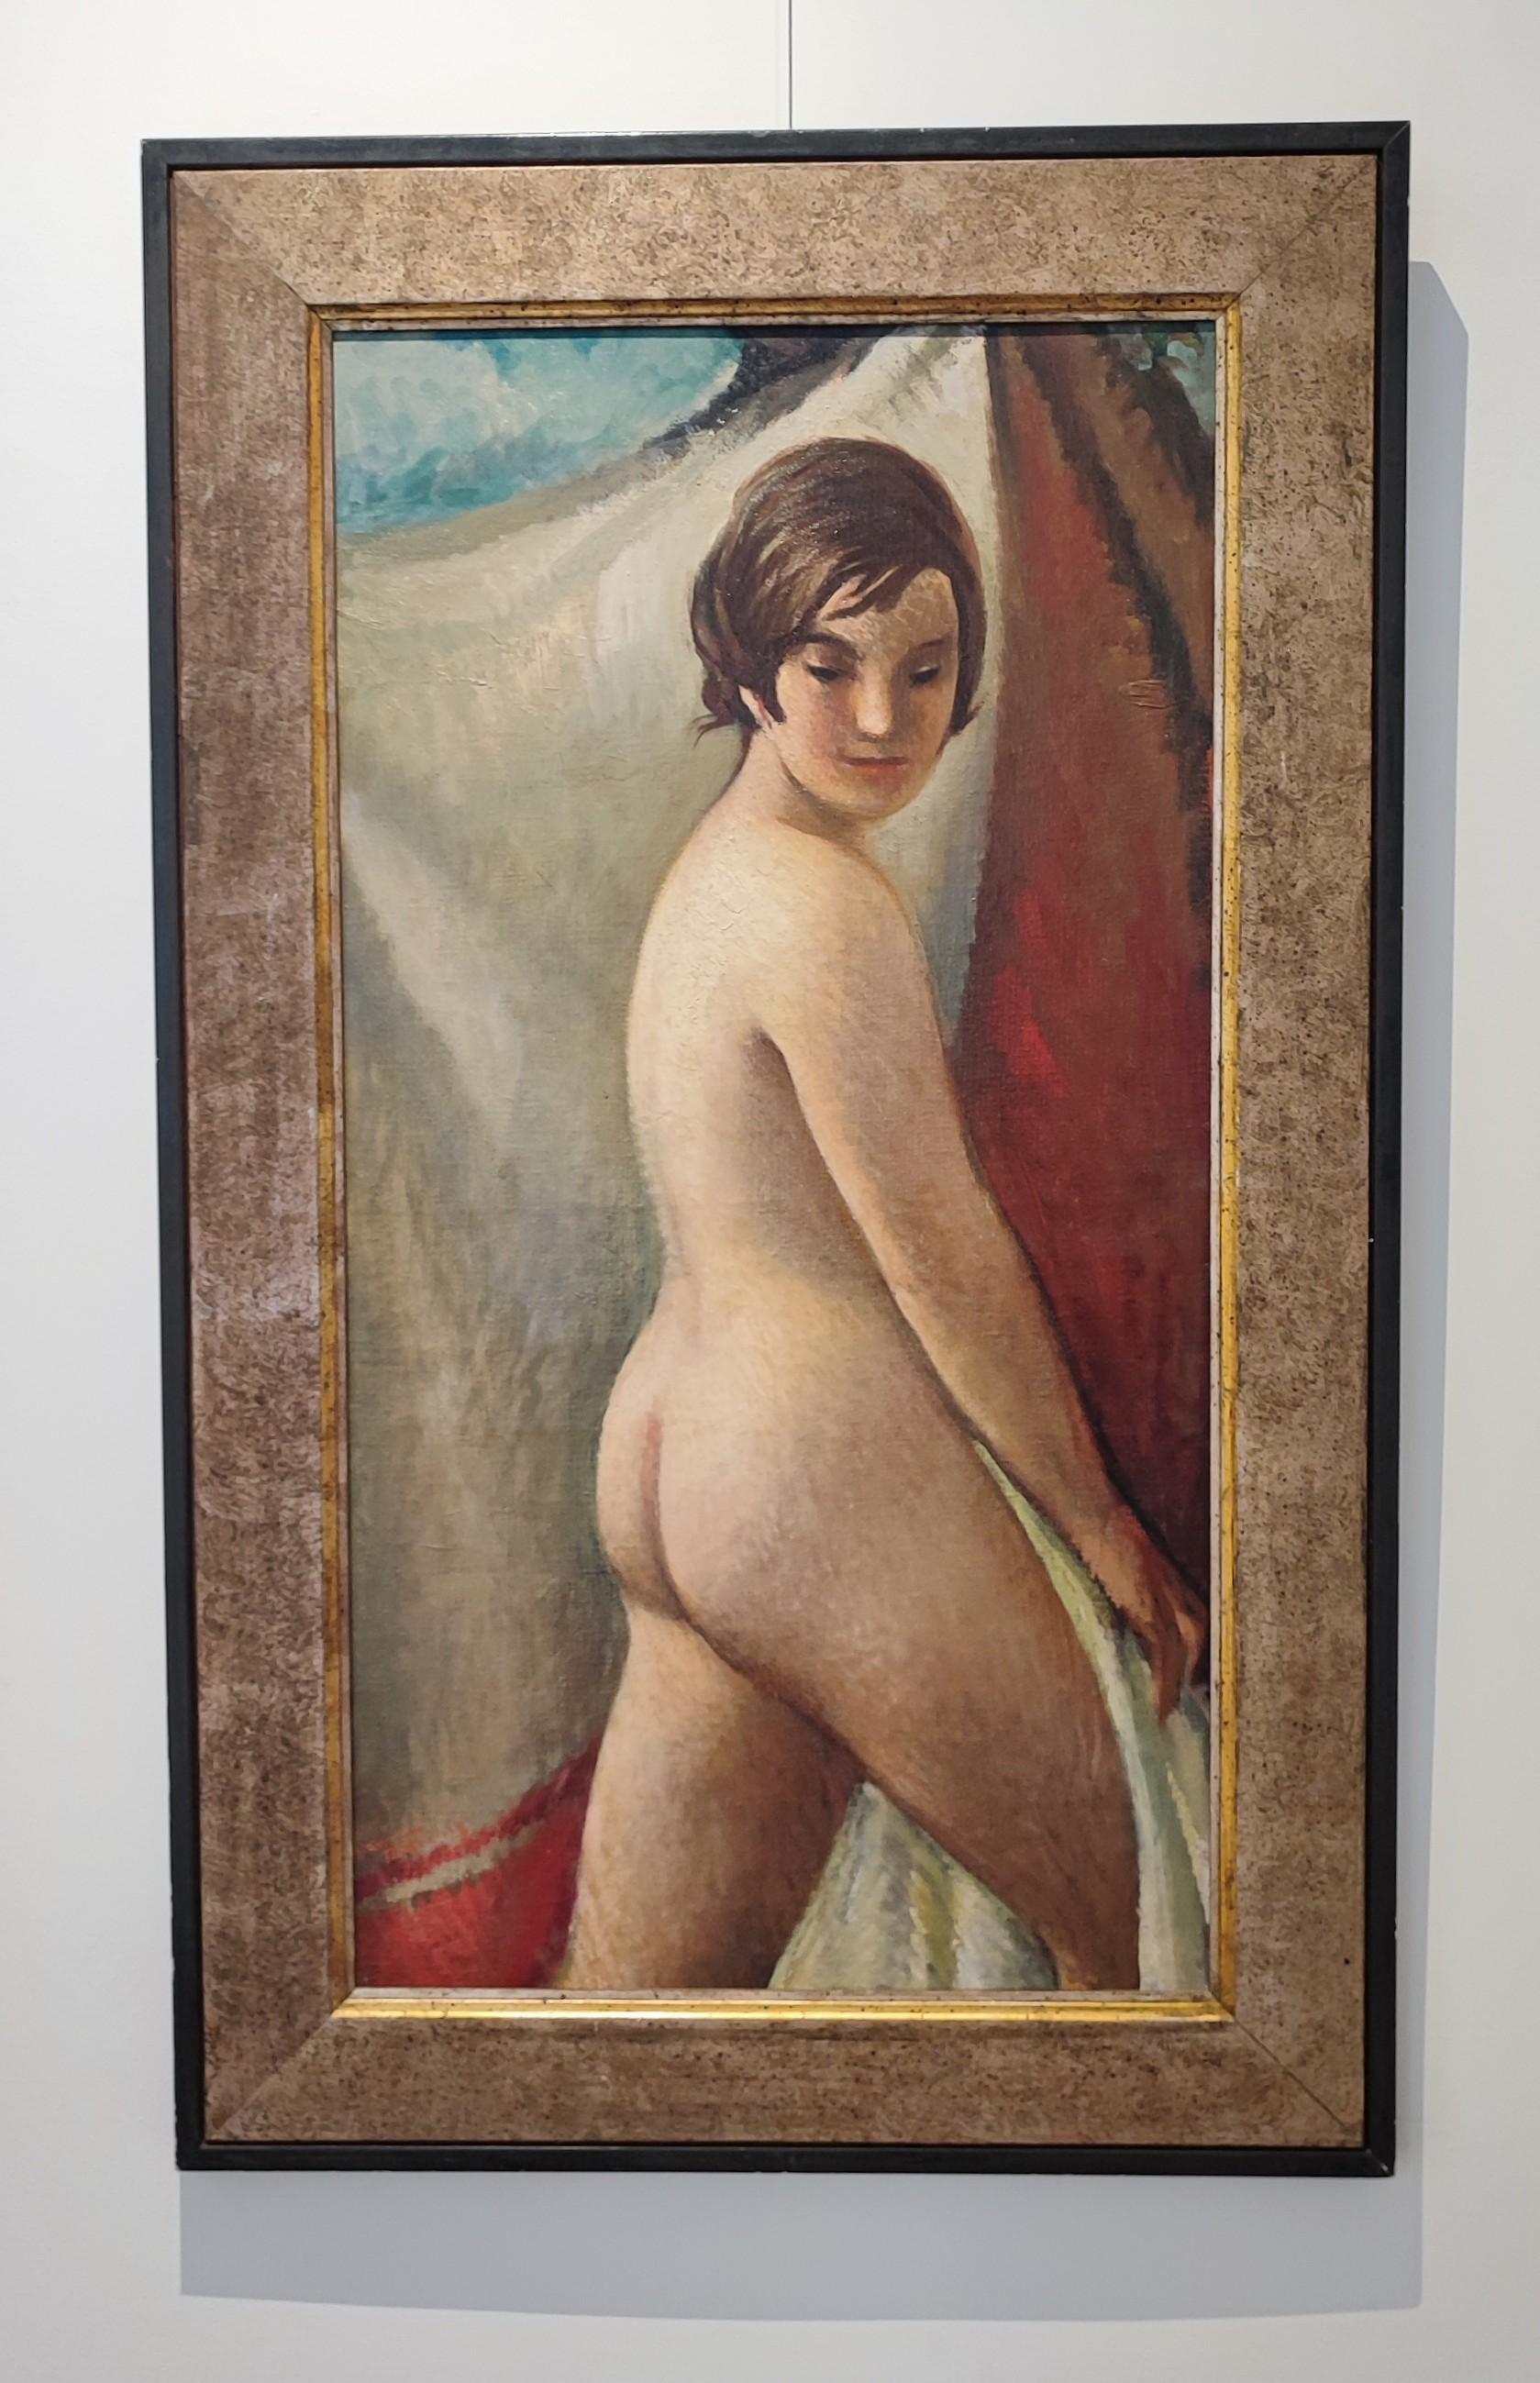 Naked young woman from behind - Modern Painting by Giannino Marchig